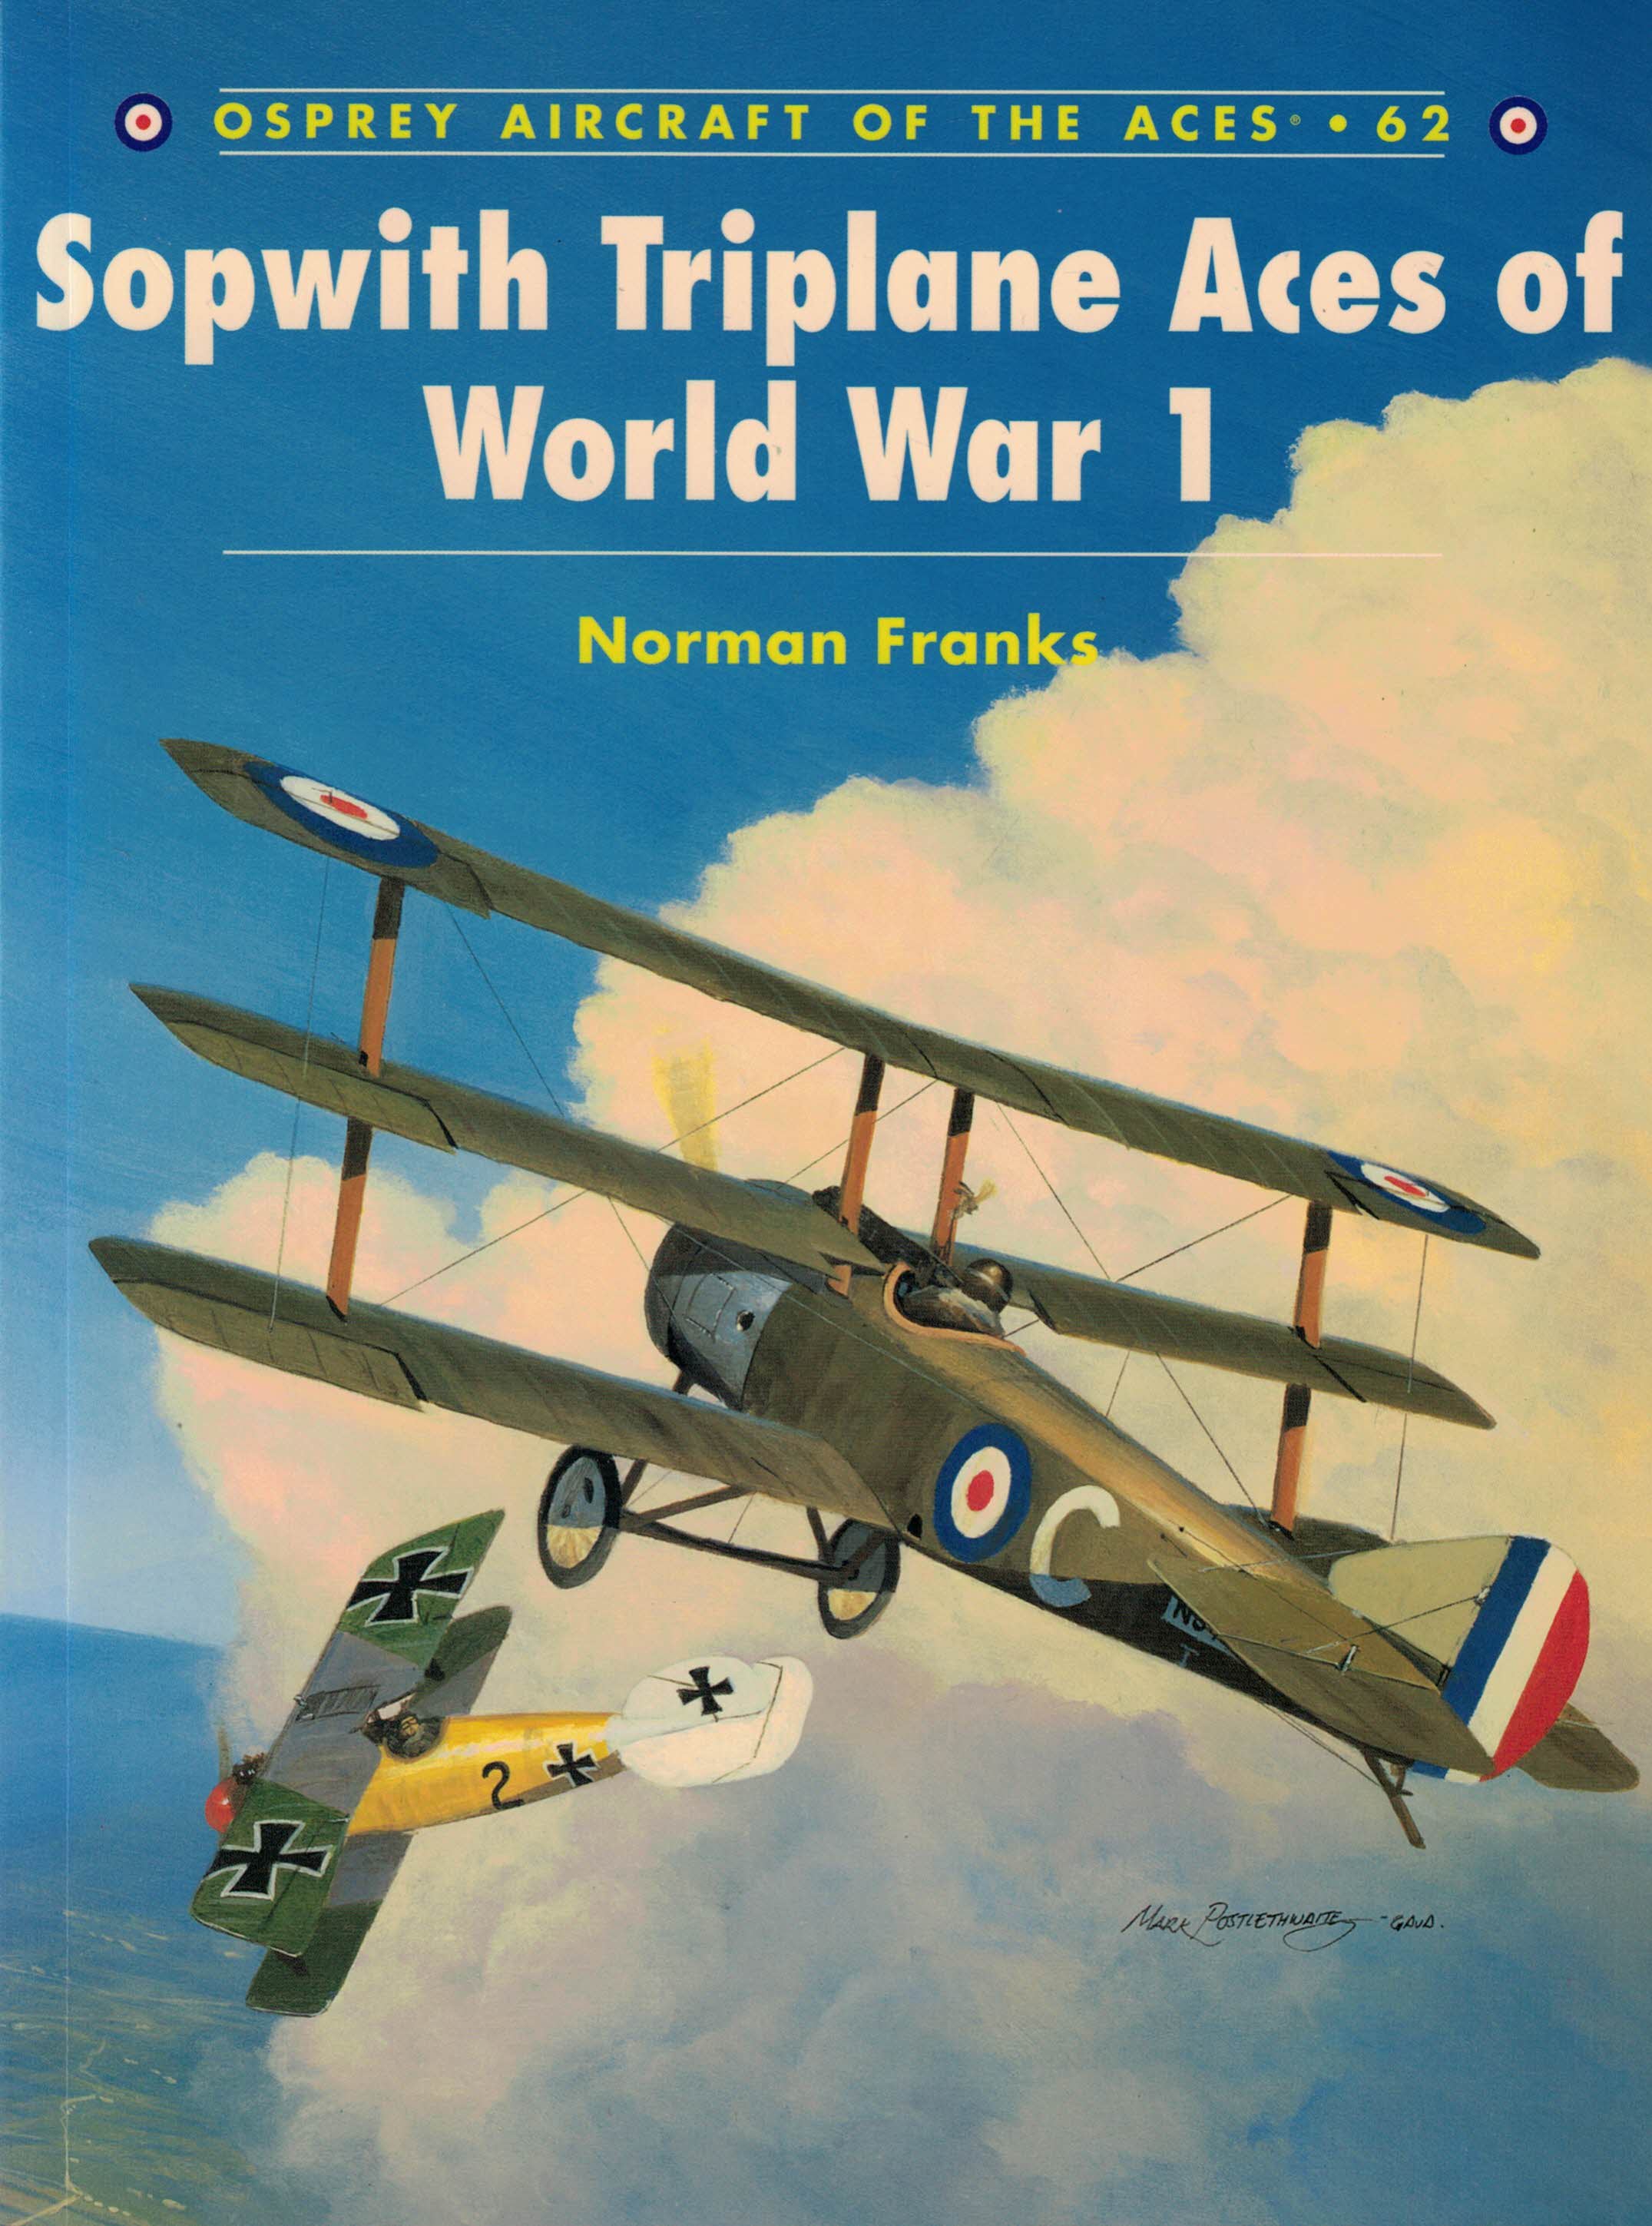 Sopwith Triplane Aces of World War 1.  Osprey Aircraft of the Aces. Series No. 62.